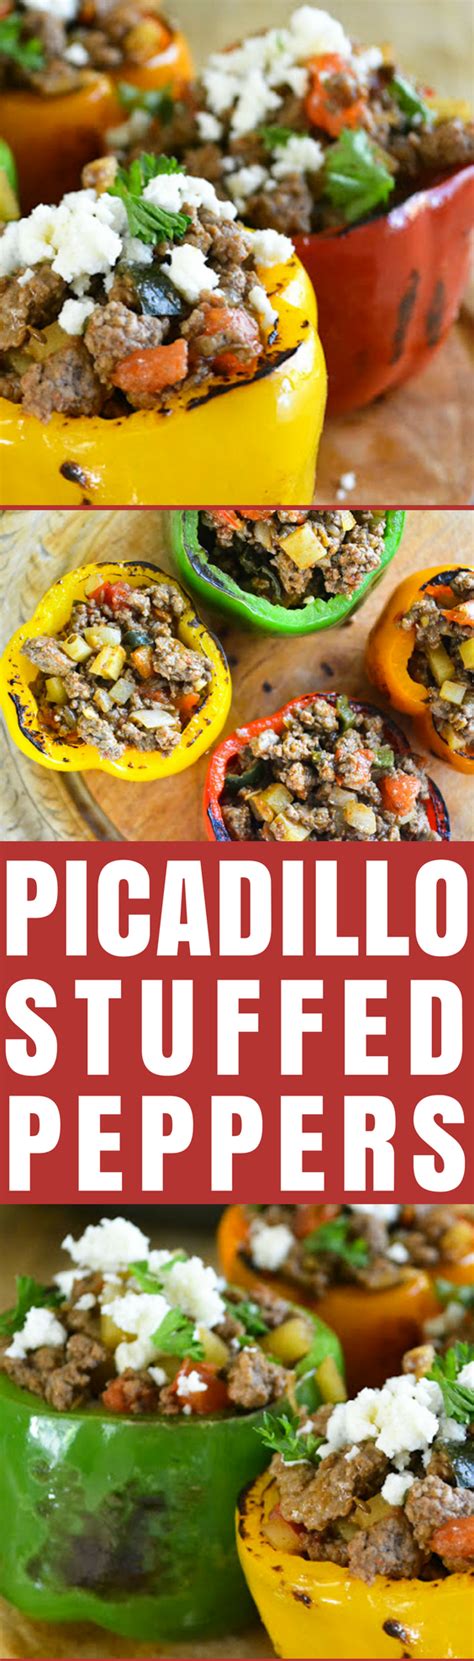 stuffed-bell-peppers-with-picadillo-the-view-from image